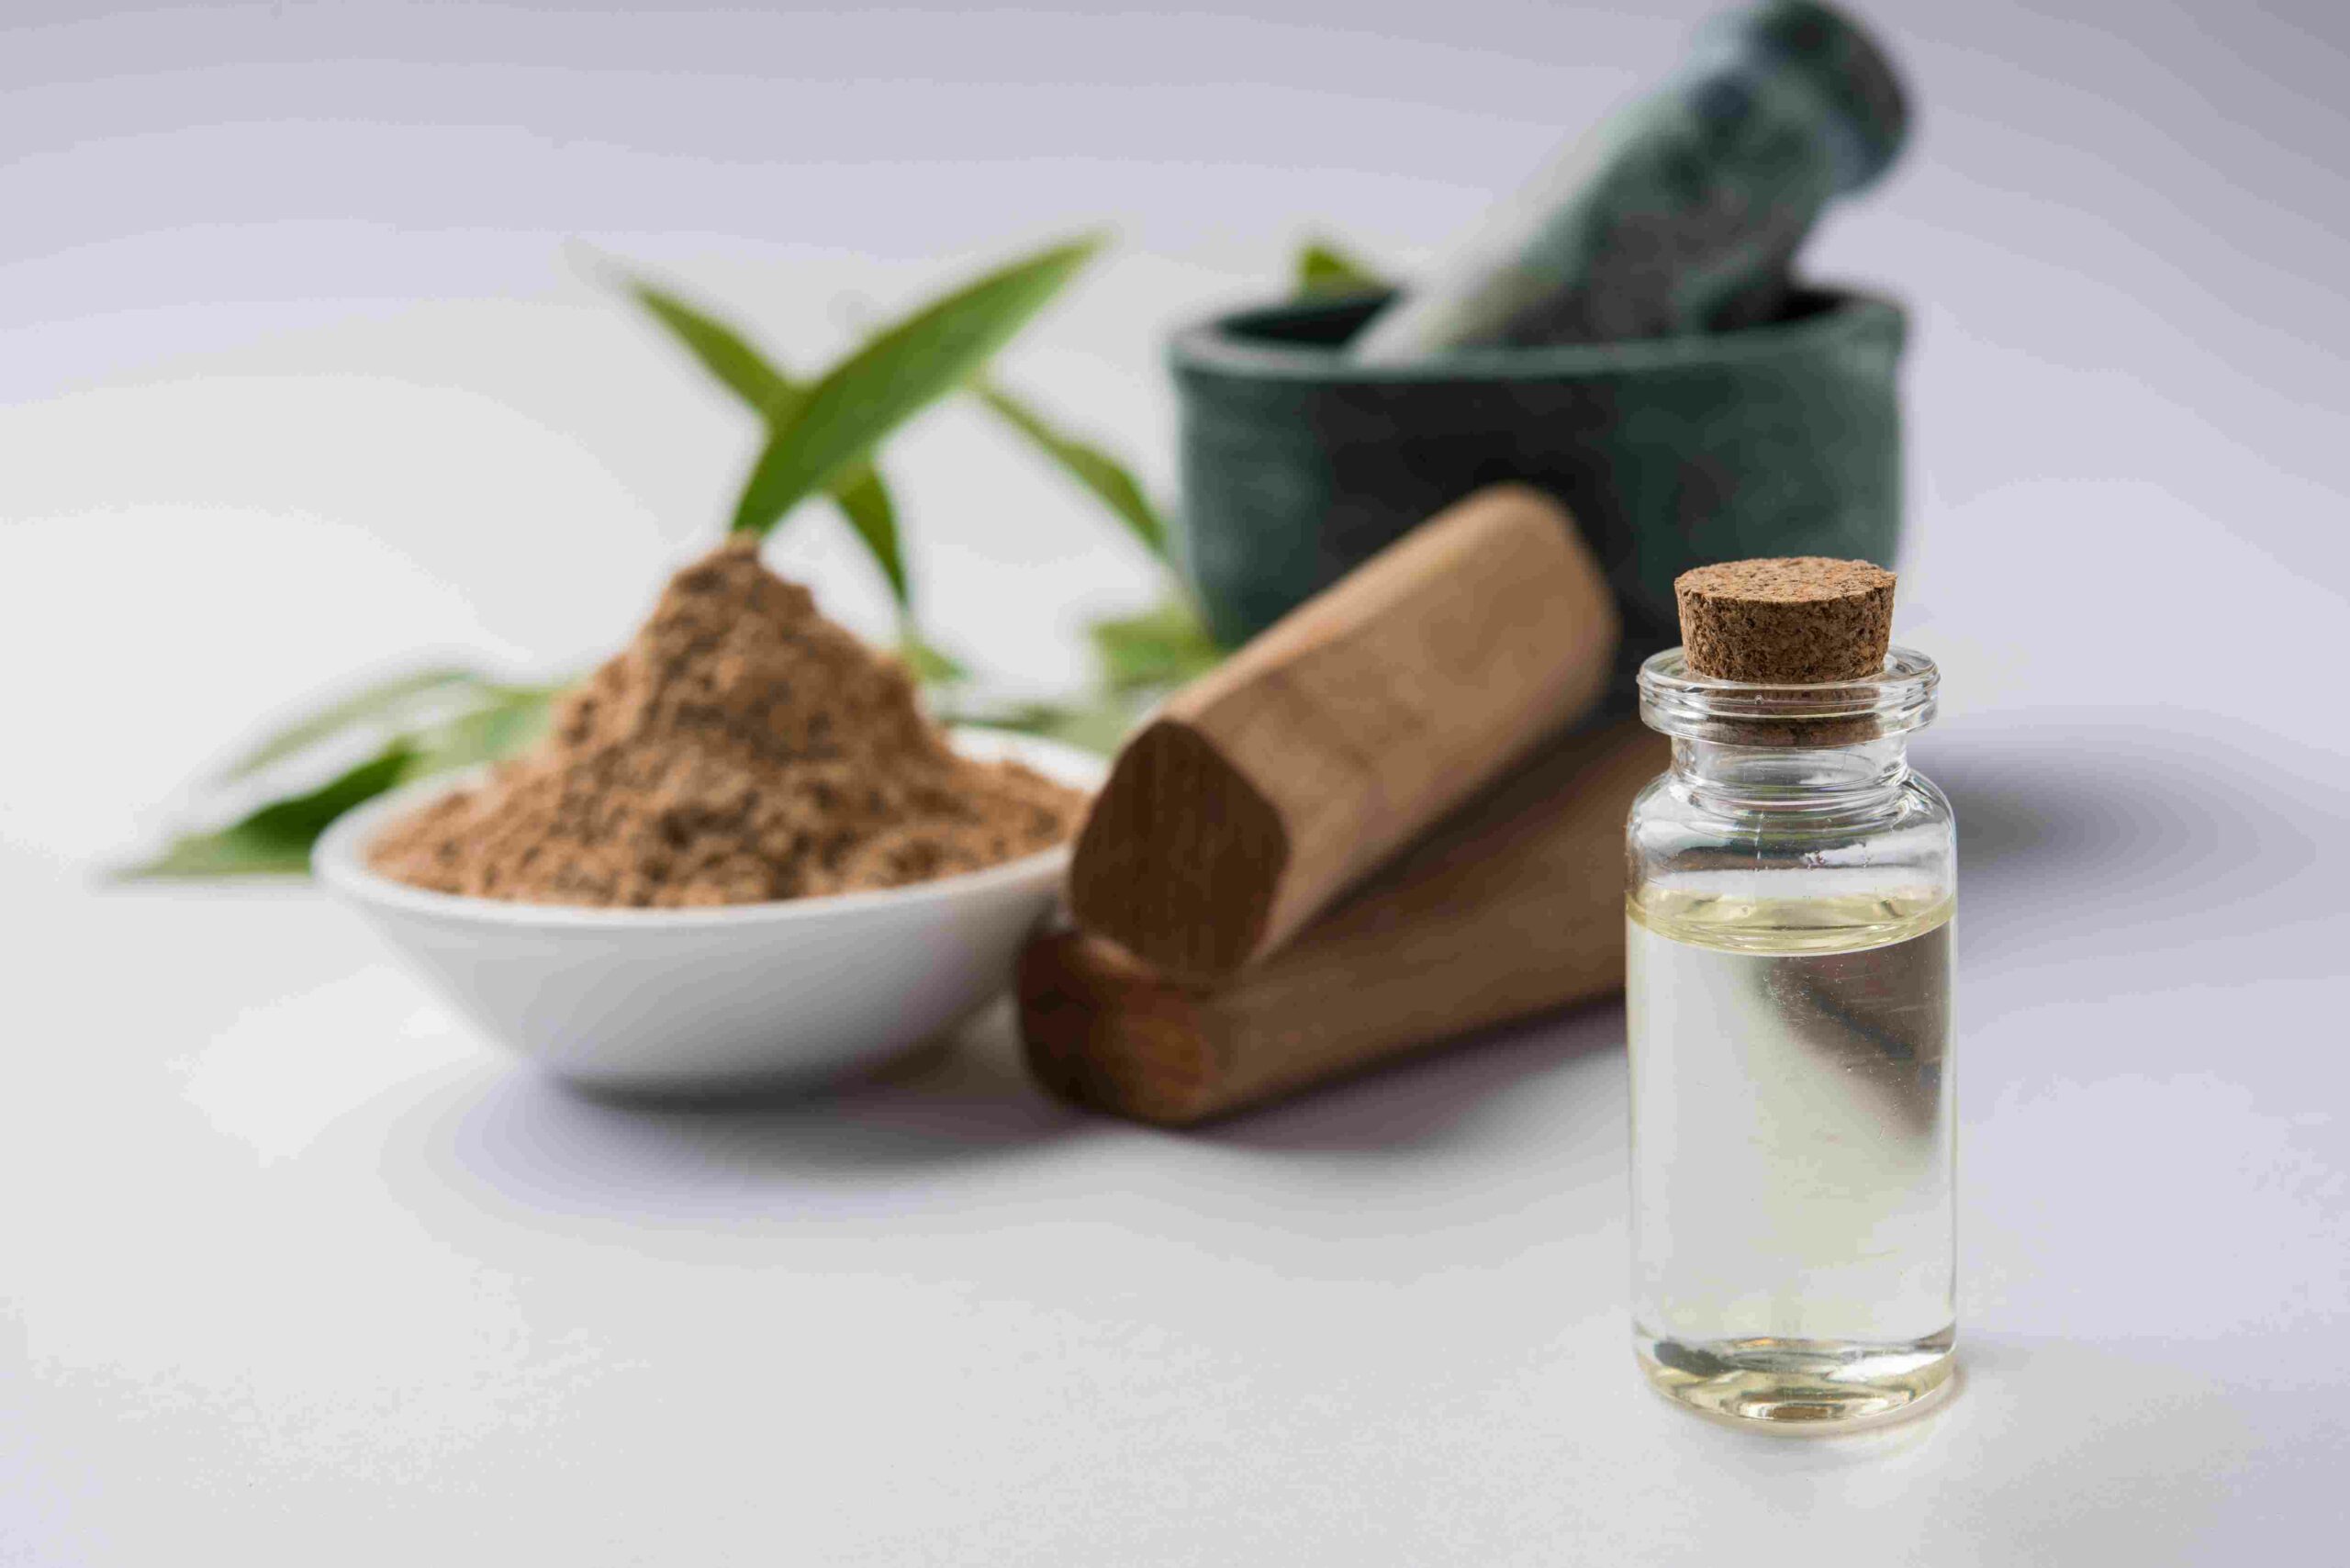 sandalwood oil and other products